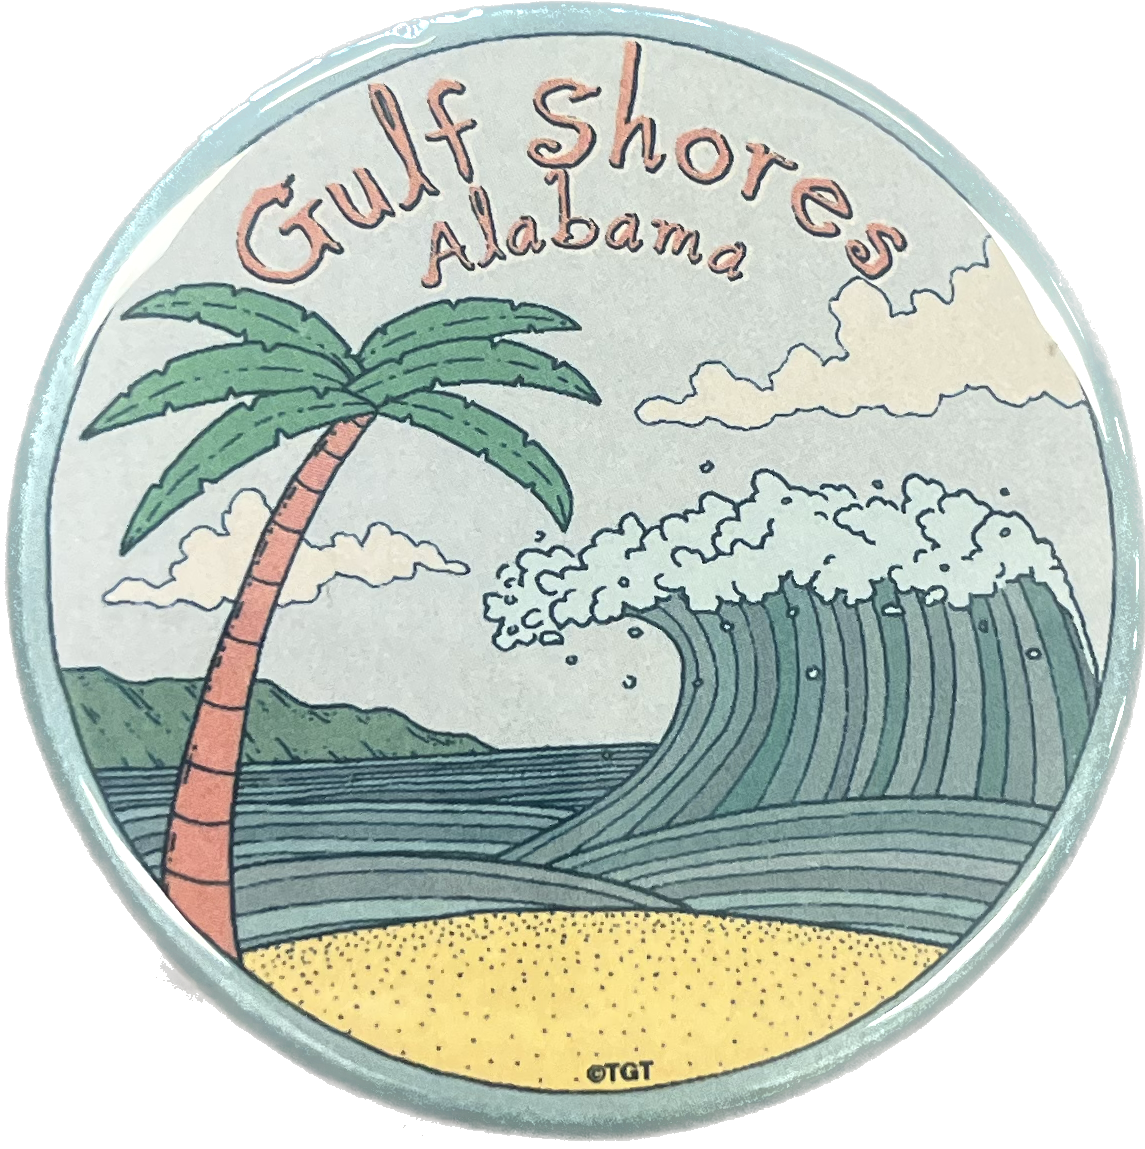 Gulf Shores Magnets